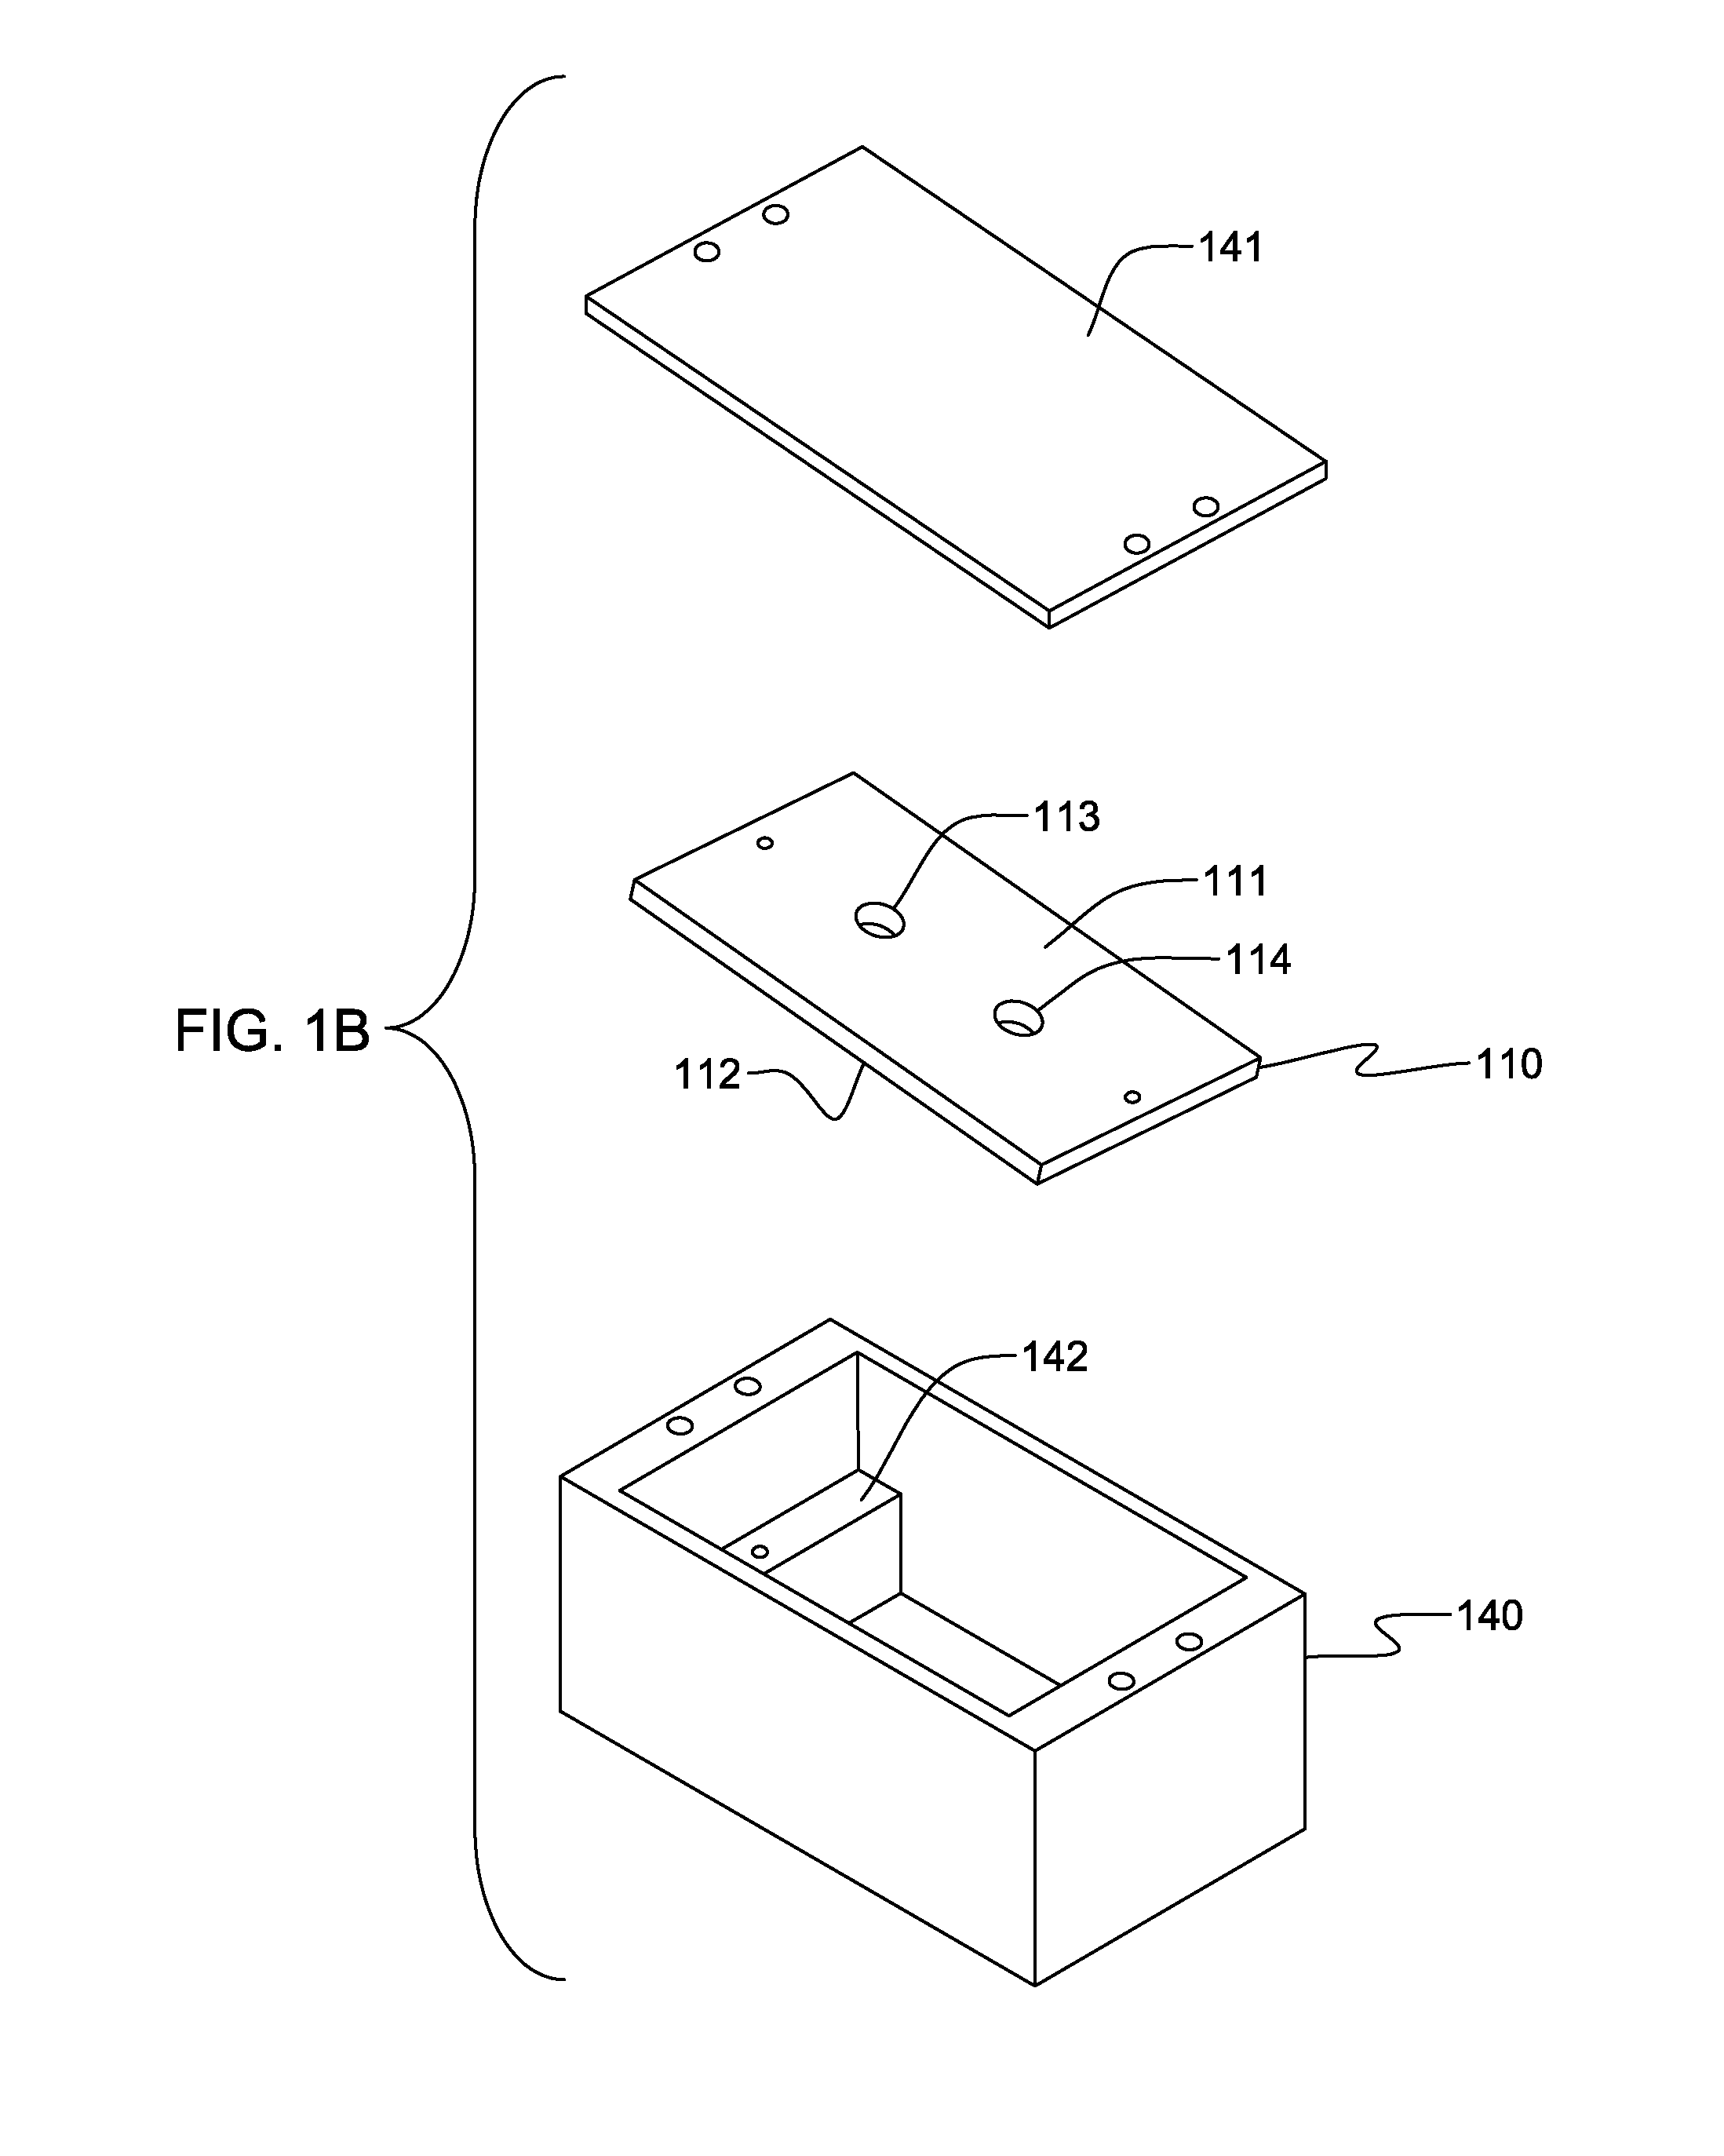 Pinned-contact, oscillating liquid-liquid lens and imaging systems